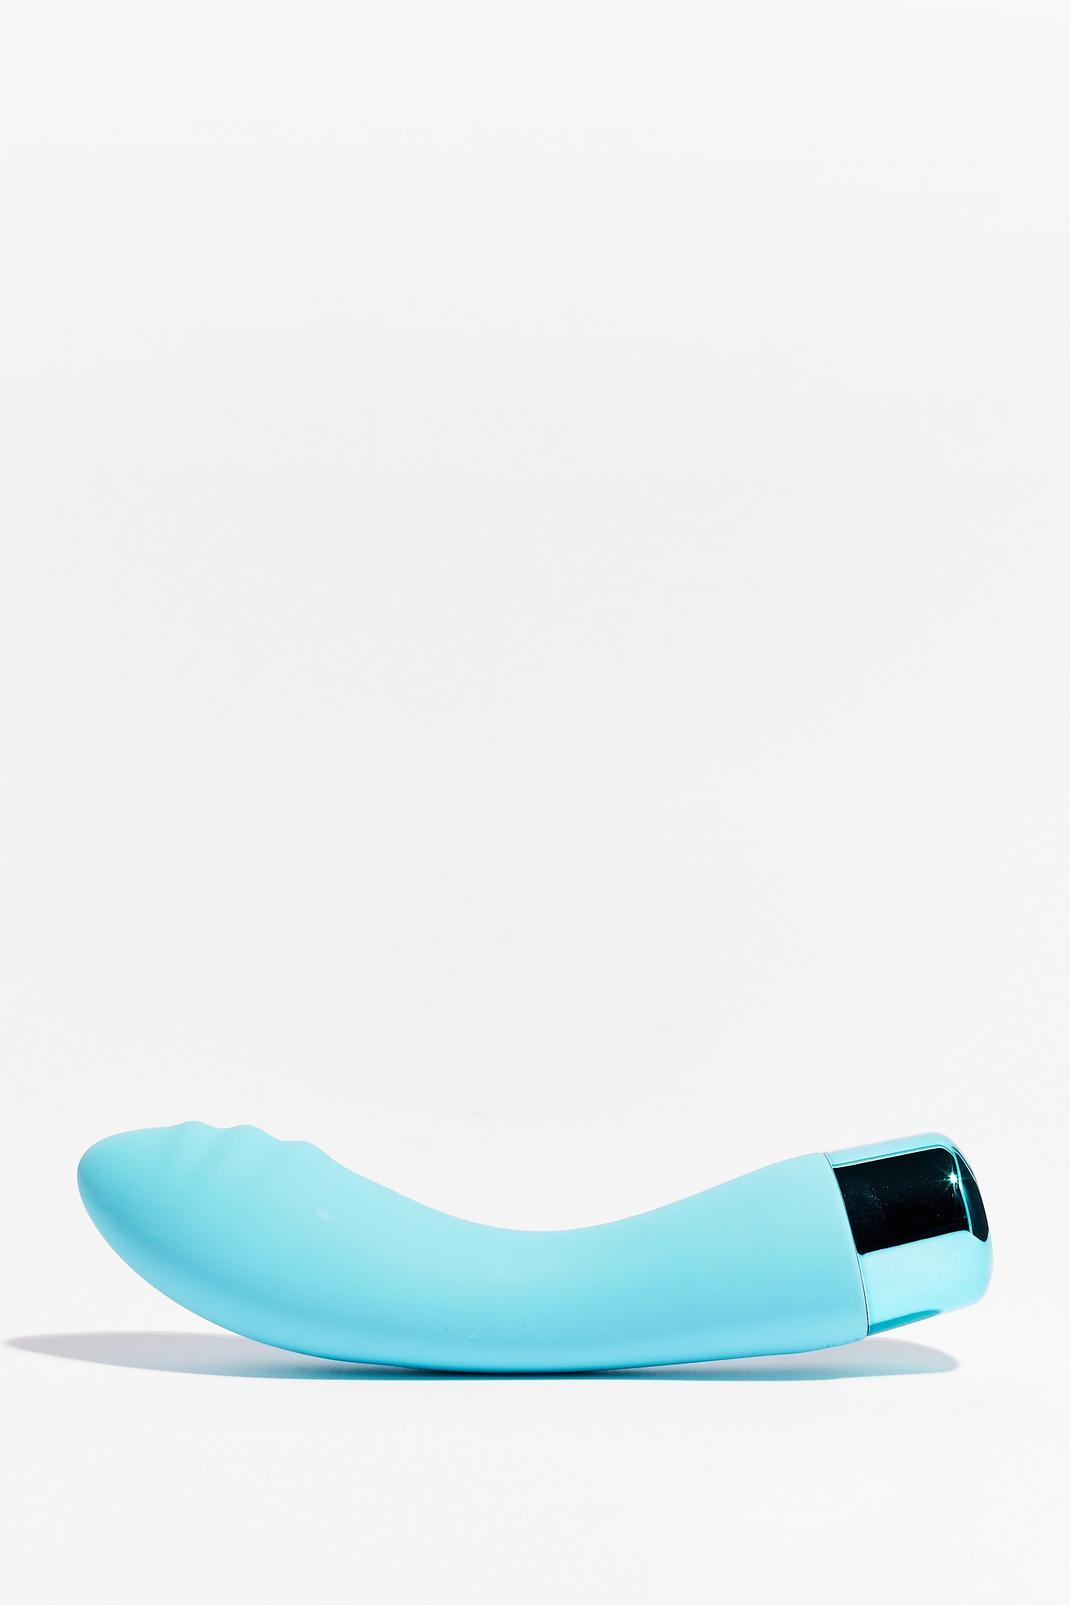 Blue Ribbed Silicone 10 Functions Vibrator image number 1